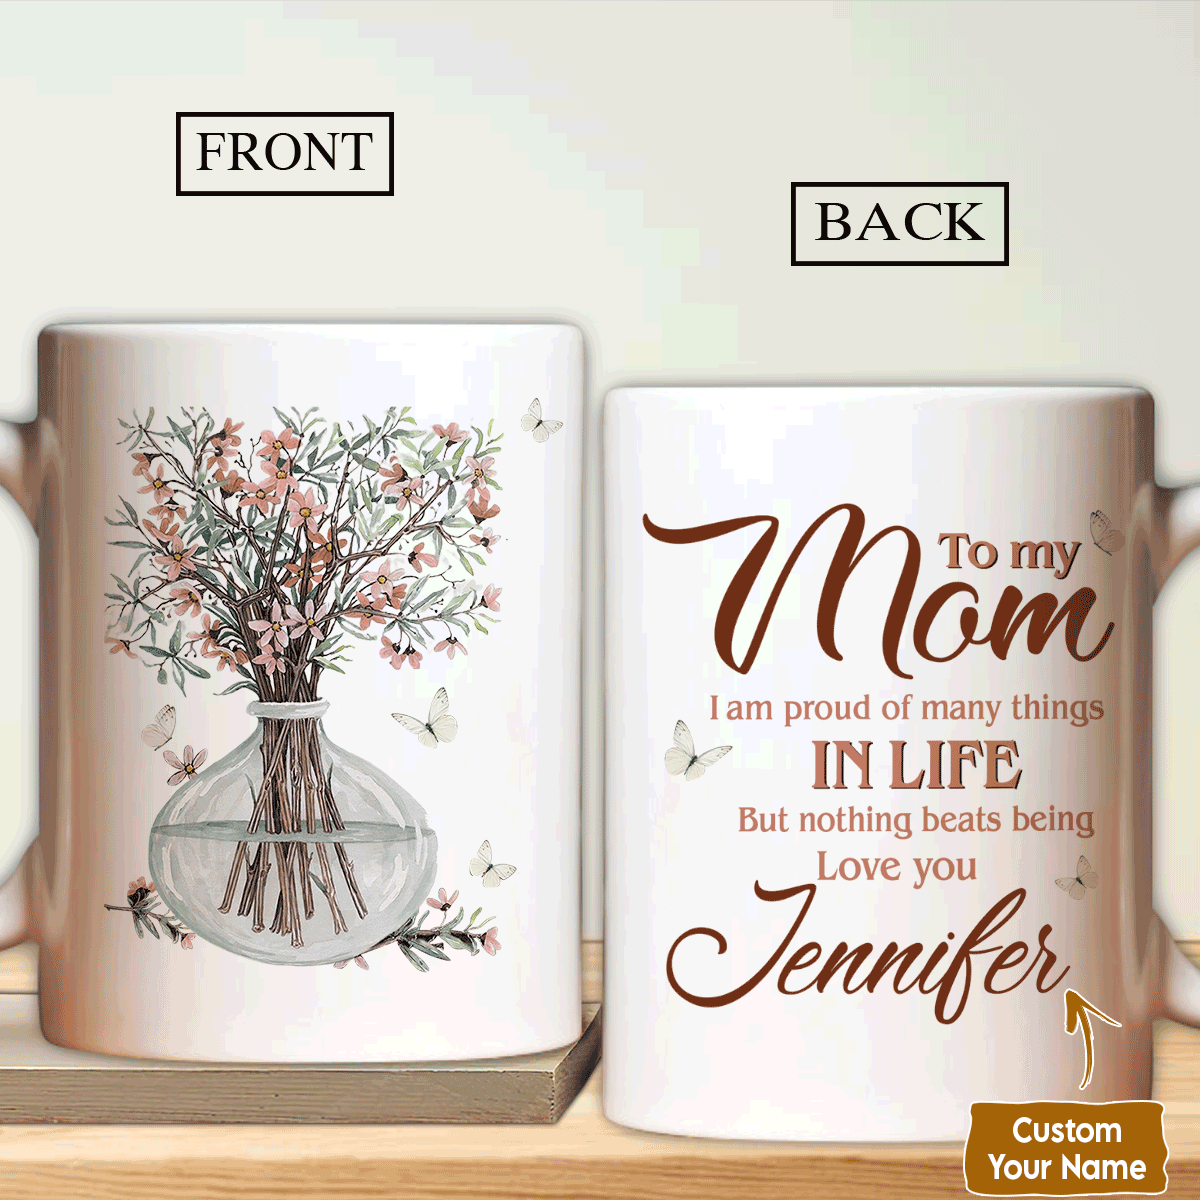 Gift For Mom Personalized Mug - Daughter to mom, Baby flower vase, Still life painting Mug - Custom Gift For Mother's Day, Presents for Mom